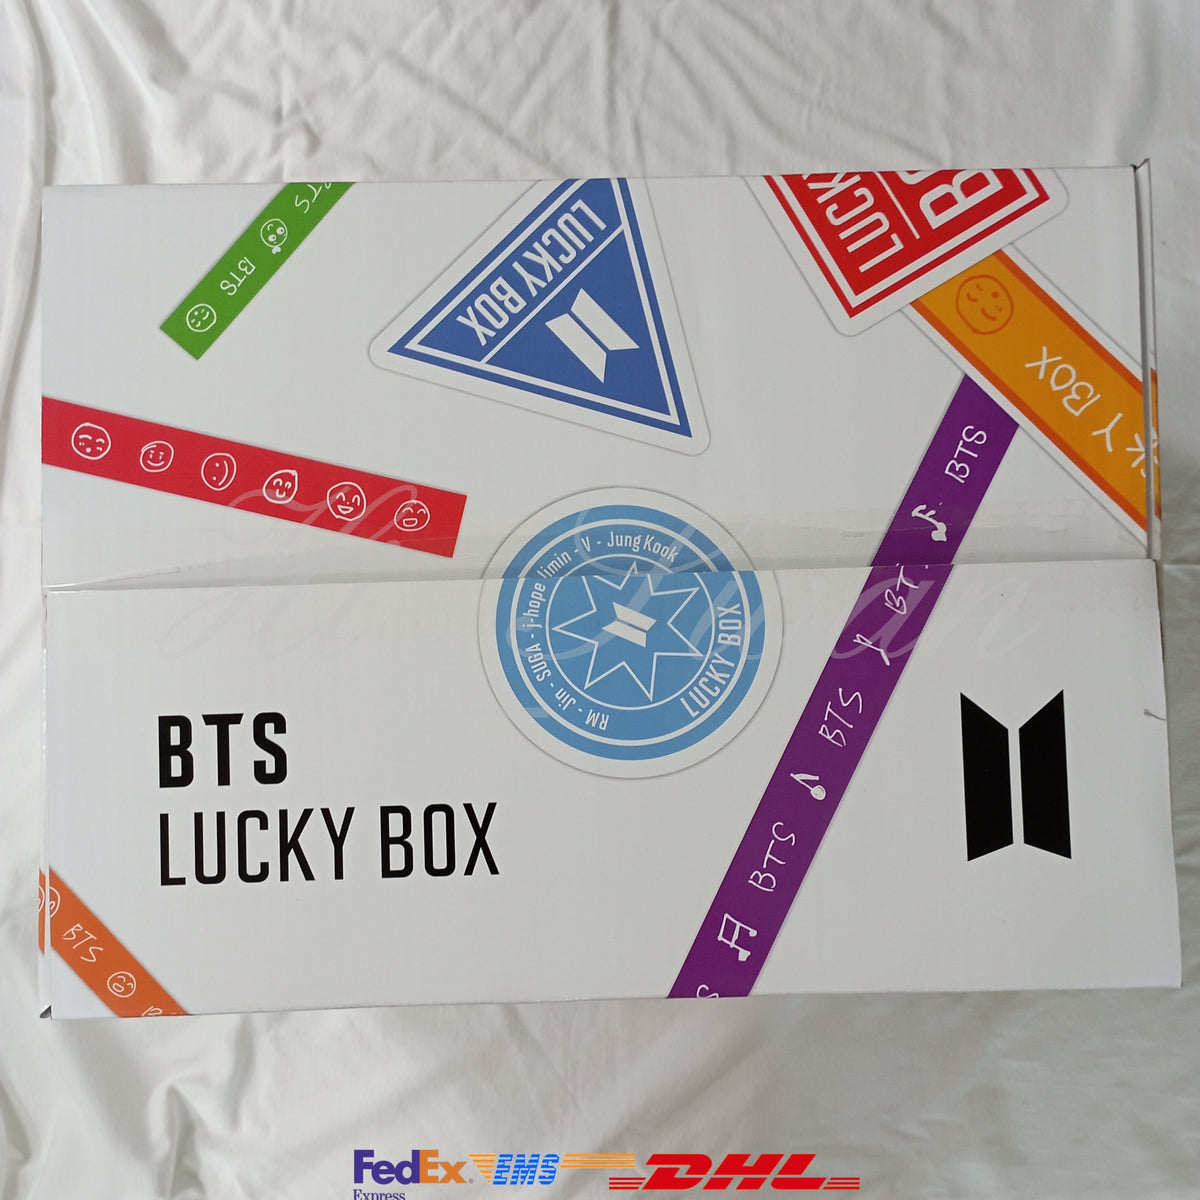 BTS] - BTS LUCKY BOX 2022 OFFICIAL MD – HISWAN